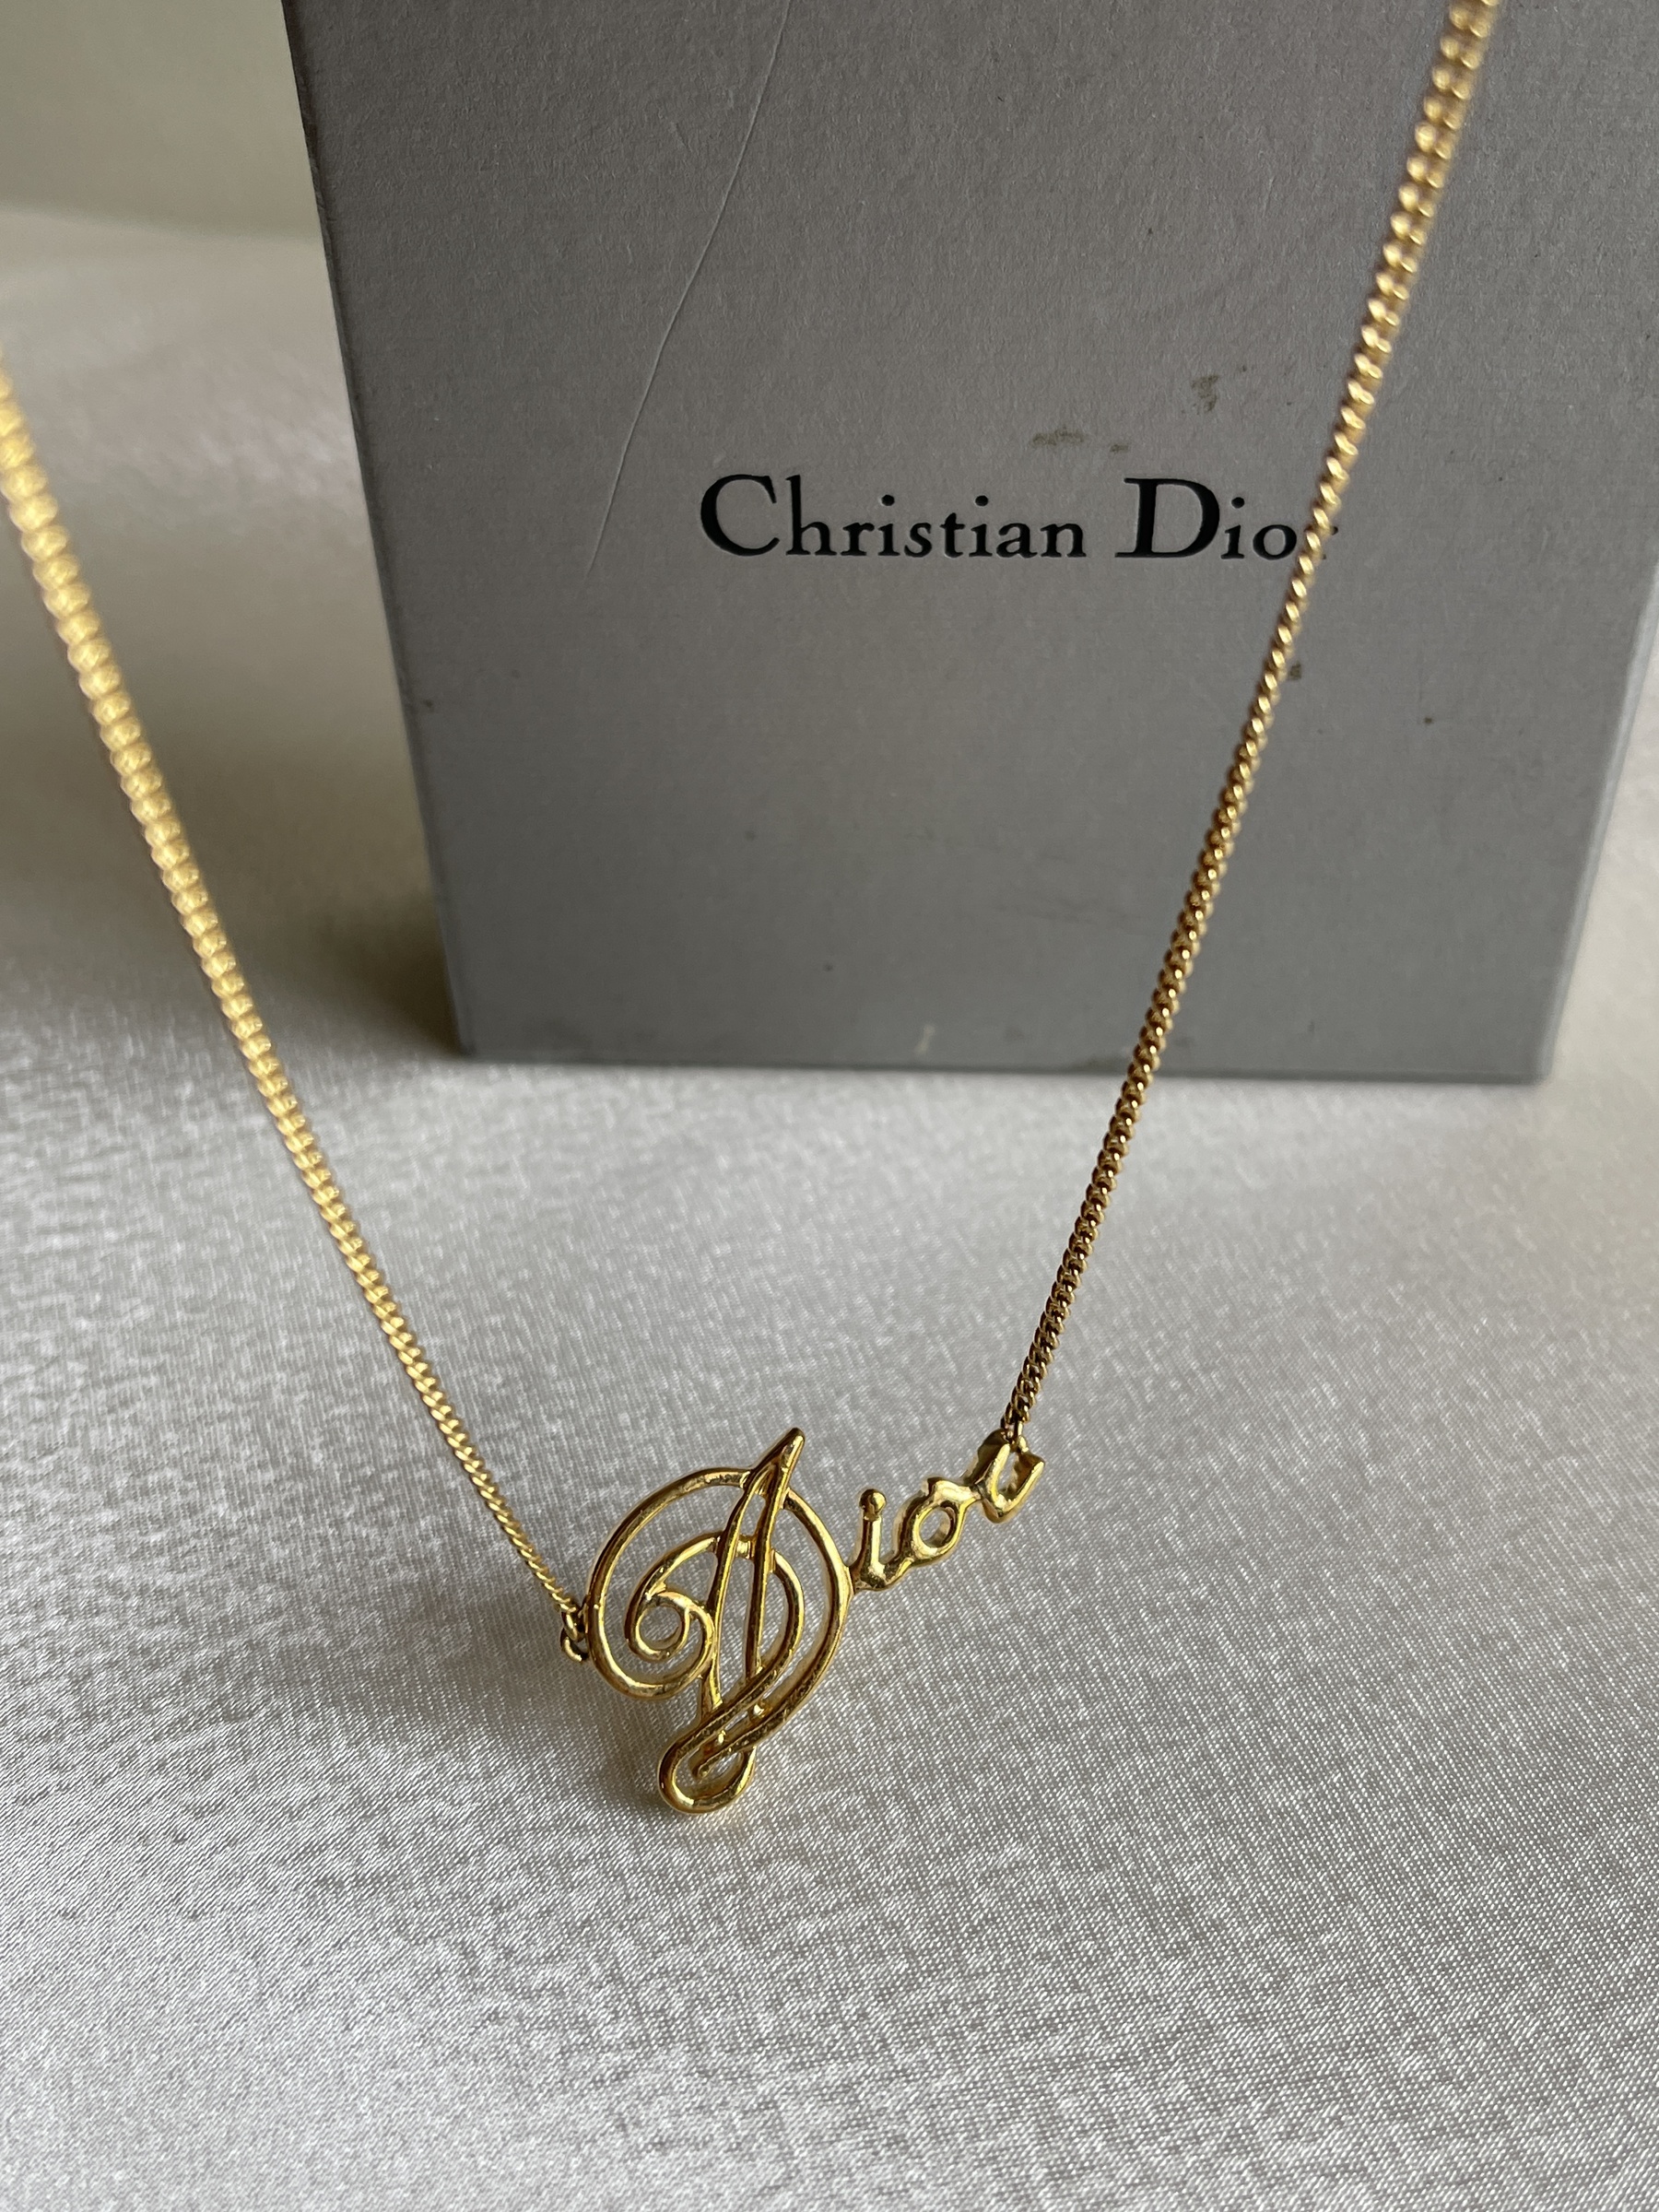 Authentic Christian DIOR necklace - pre-owned | Dior jewelry necklace, Dior  jewelry, Jewelry